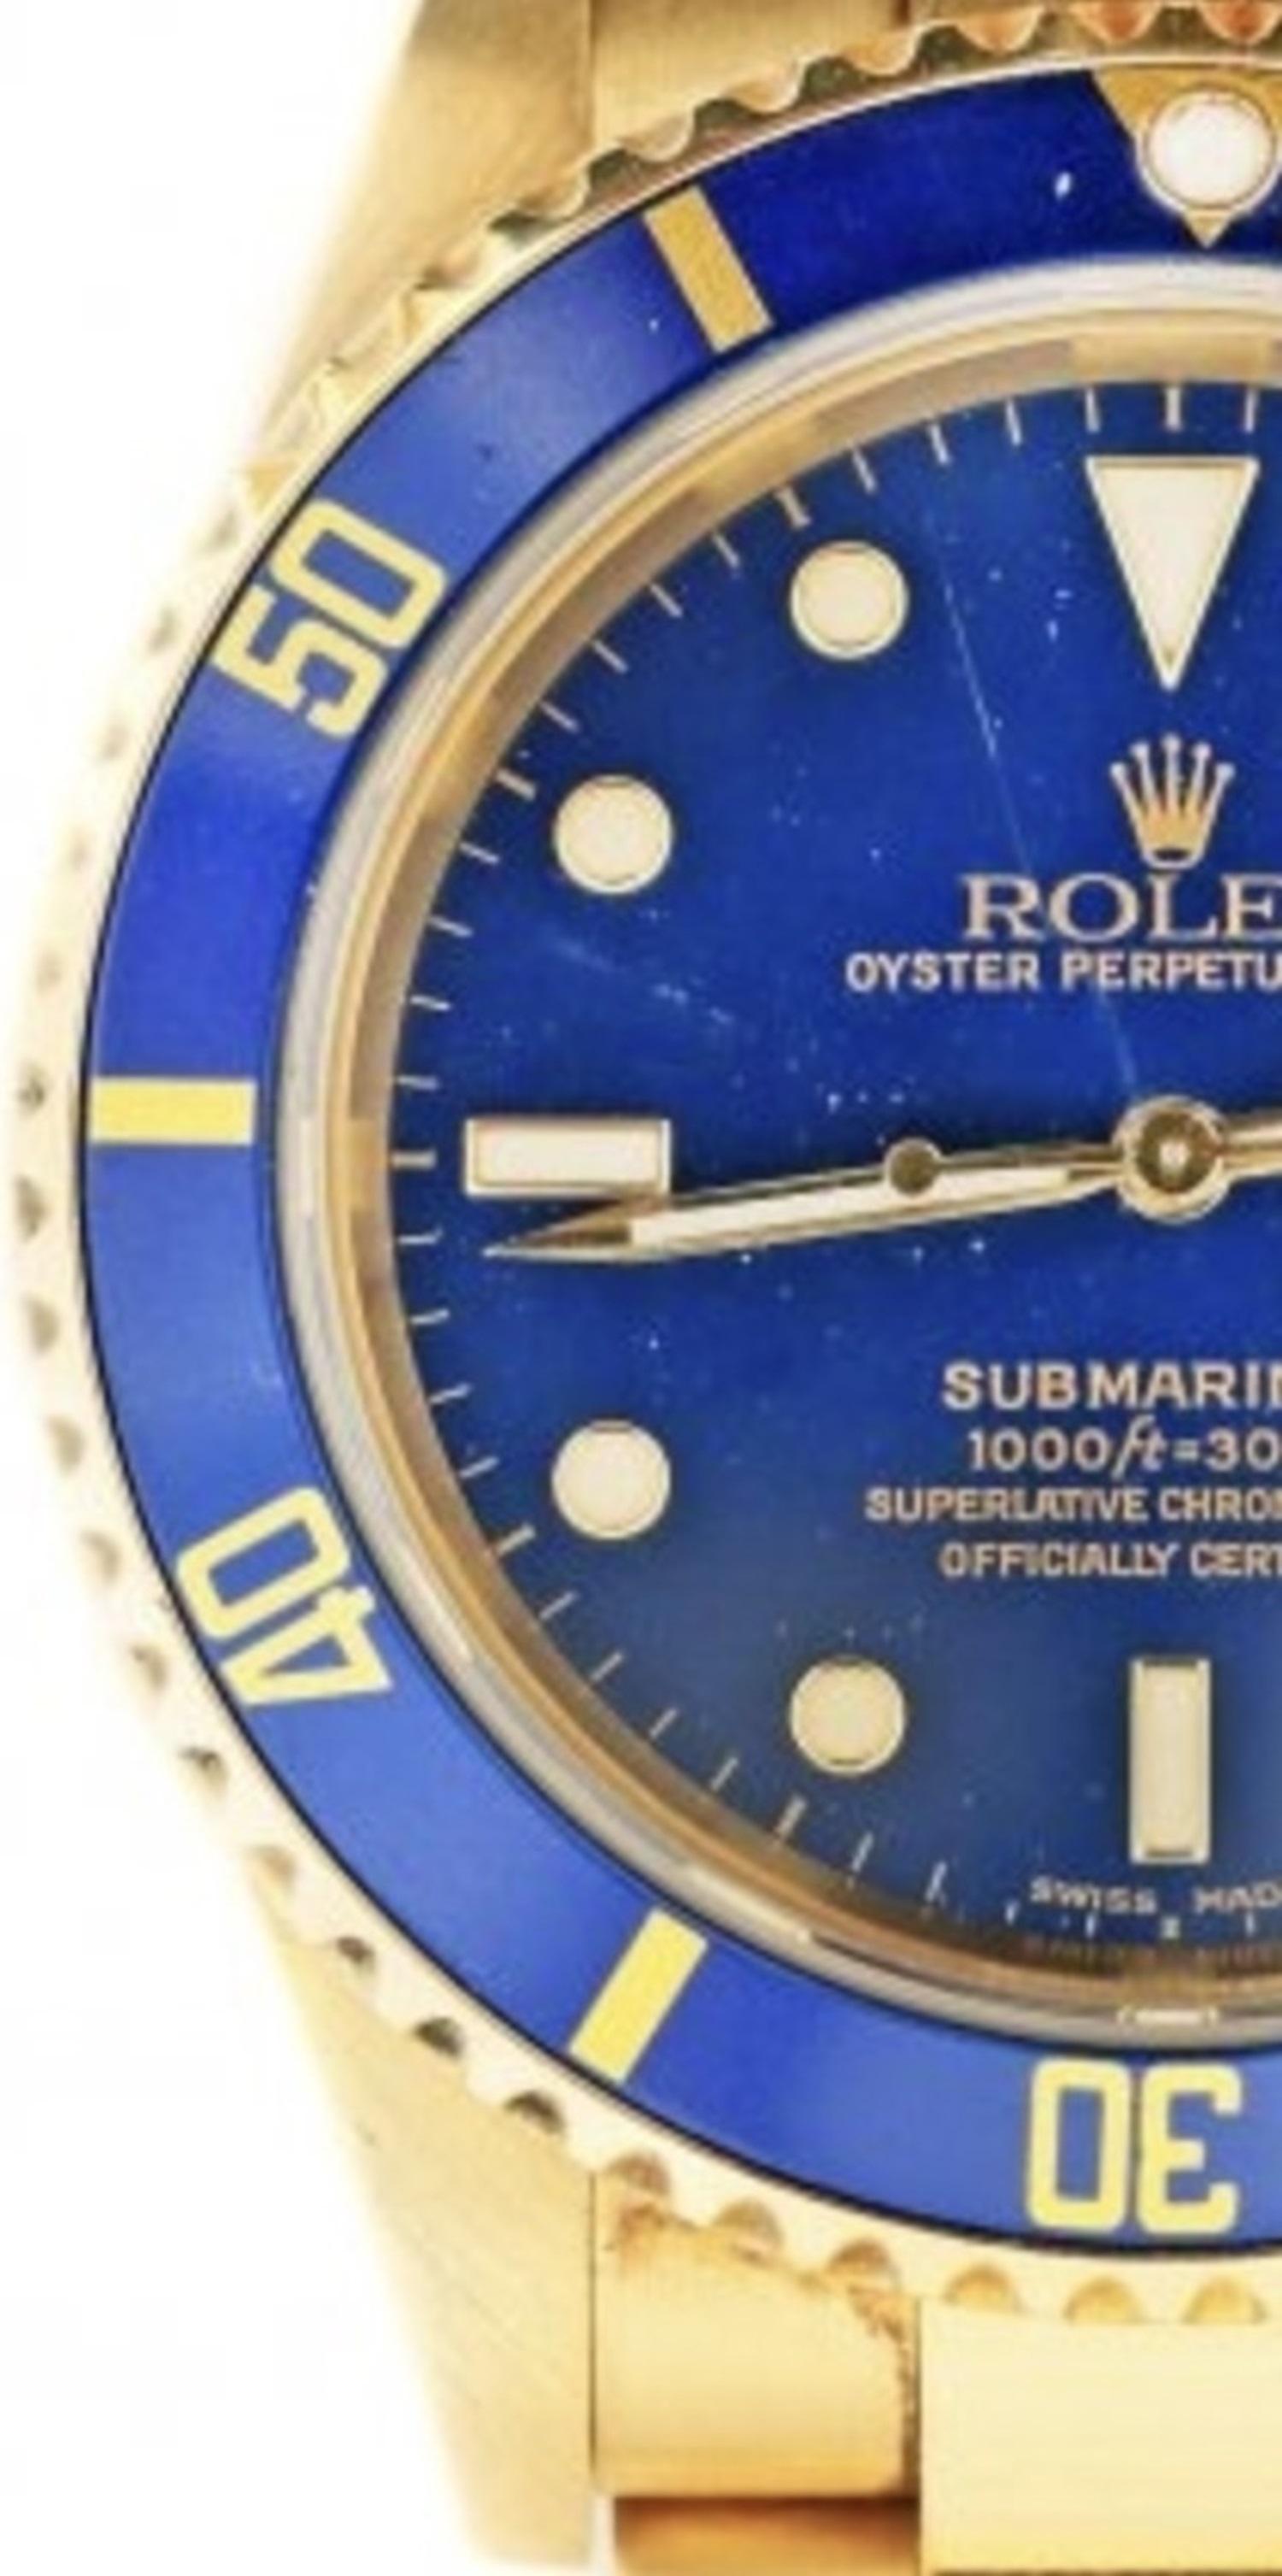 
18KT Rolex Oyster Perpetual Submariner Wristwatch 
Swiss, automatic mechanical movementwith date. Blue dial inscribed Submariner, 1000ft=300m. The blue rotating outer bezel calibrated for minutes. Case, dial and movement signed Rolex. Bracelet